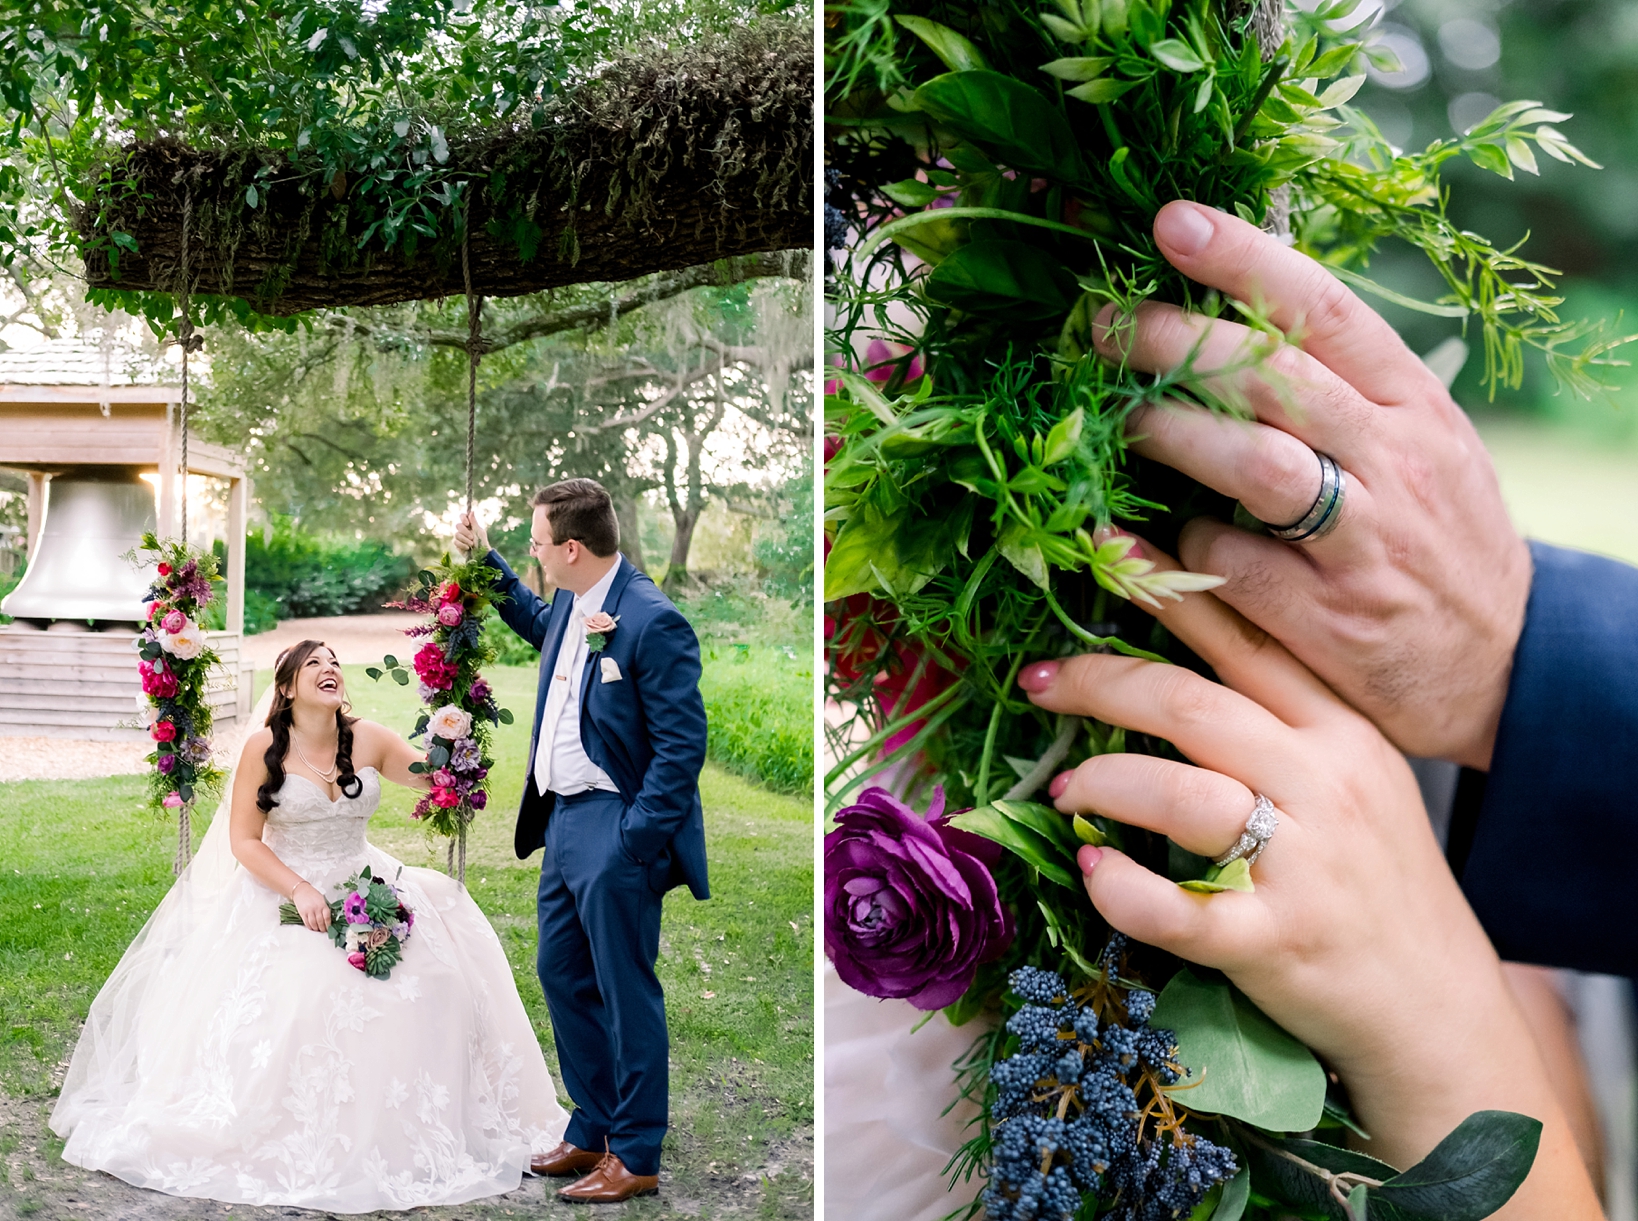 Bride and Groom's hands with wedding rings hold the rope of a swing